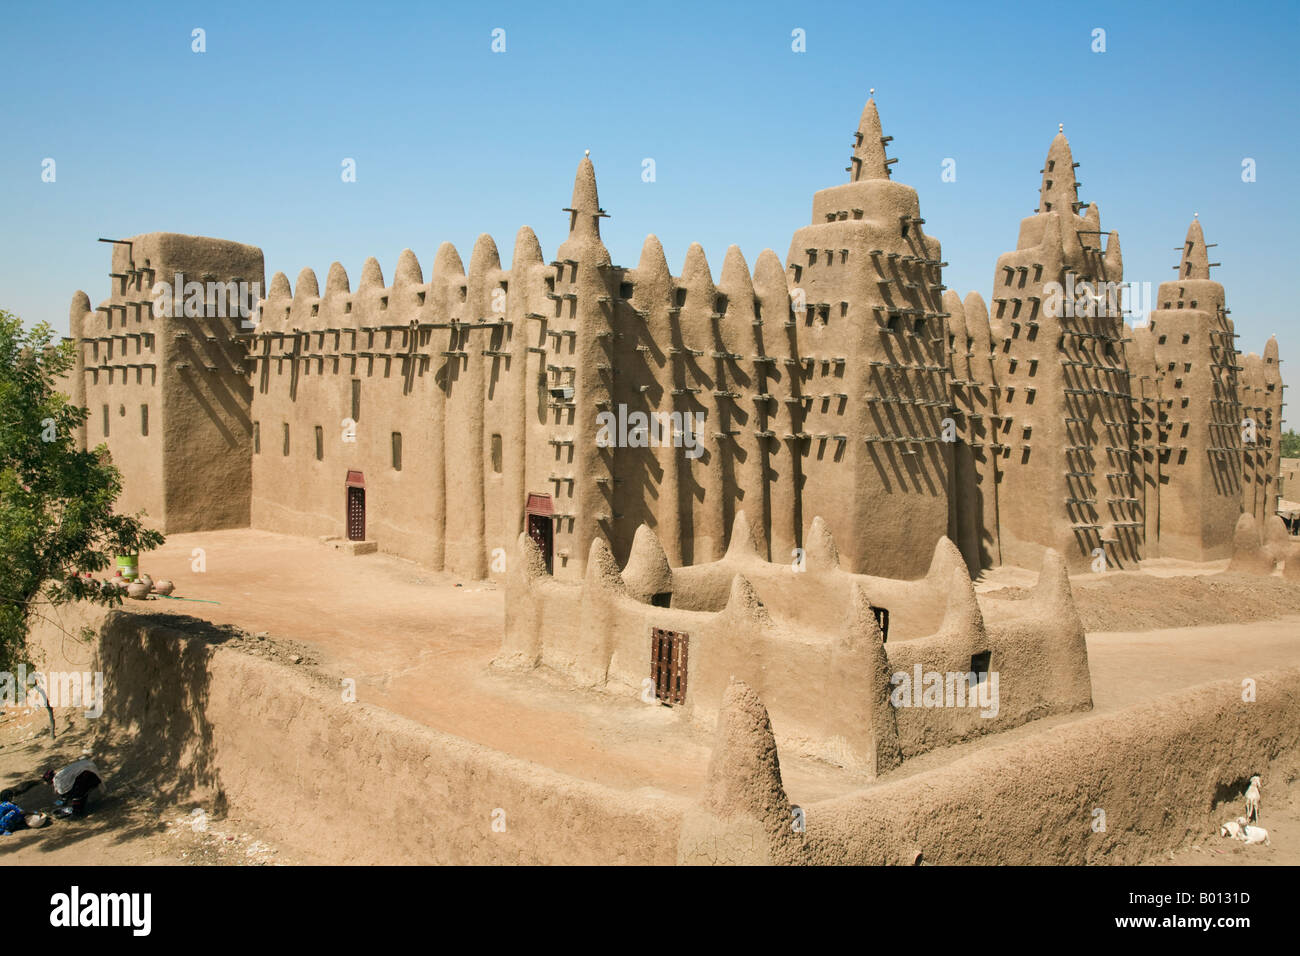 Mali, Djenne. The Great Mosque of Djenne - constructed on the foundations of a 13th century mosque built by King Koy Konboro. Stock Photo